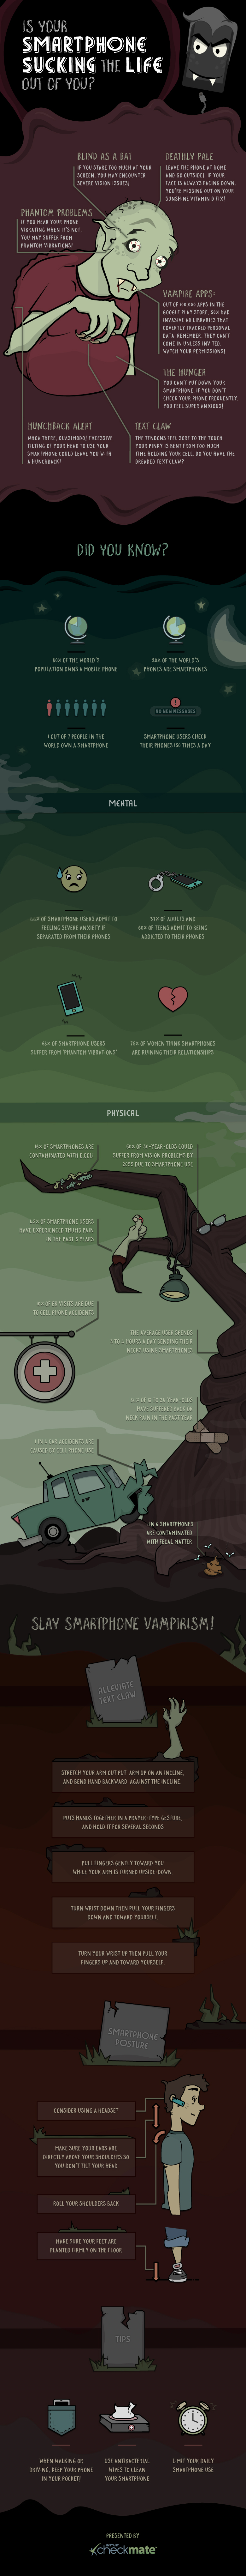 021016_RPL_Cell-Phone-Ailments-Infographic